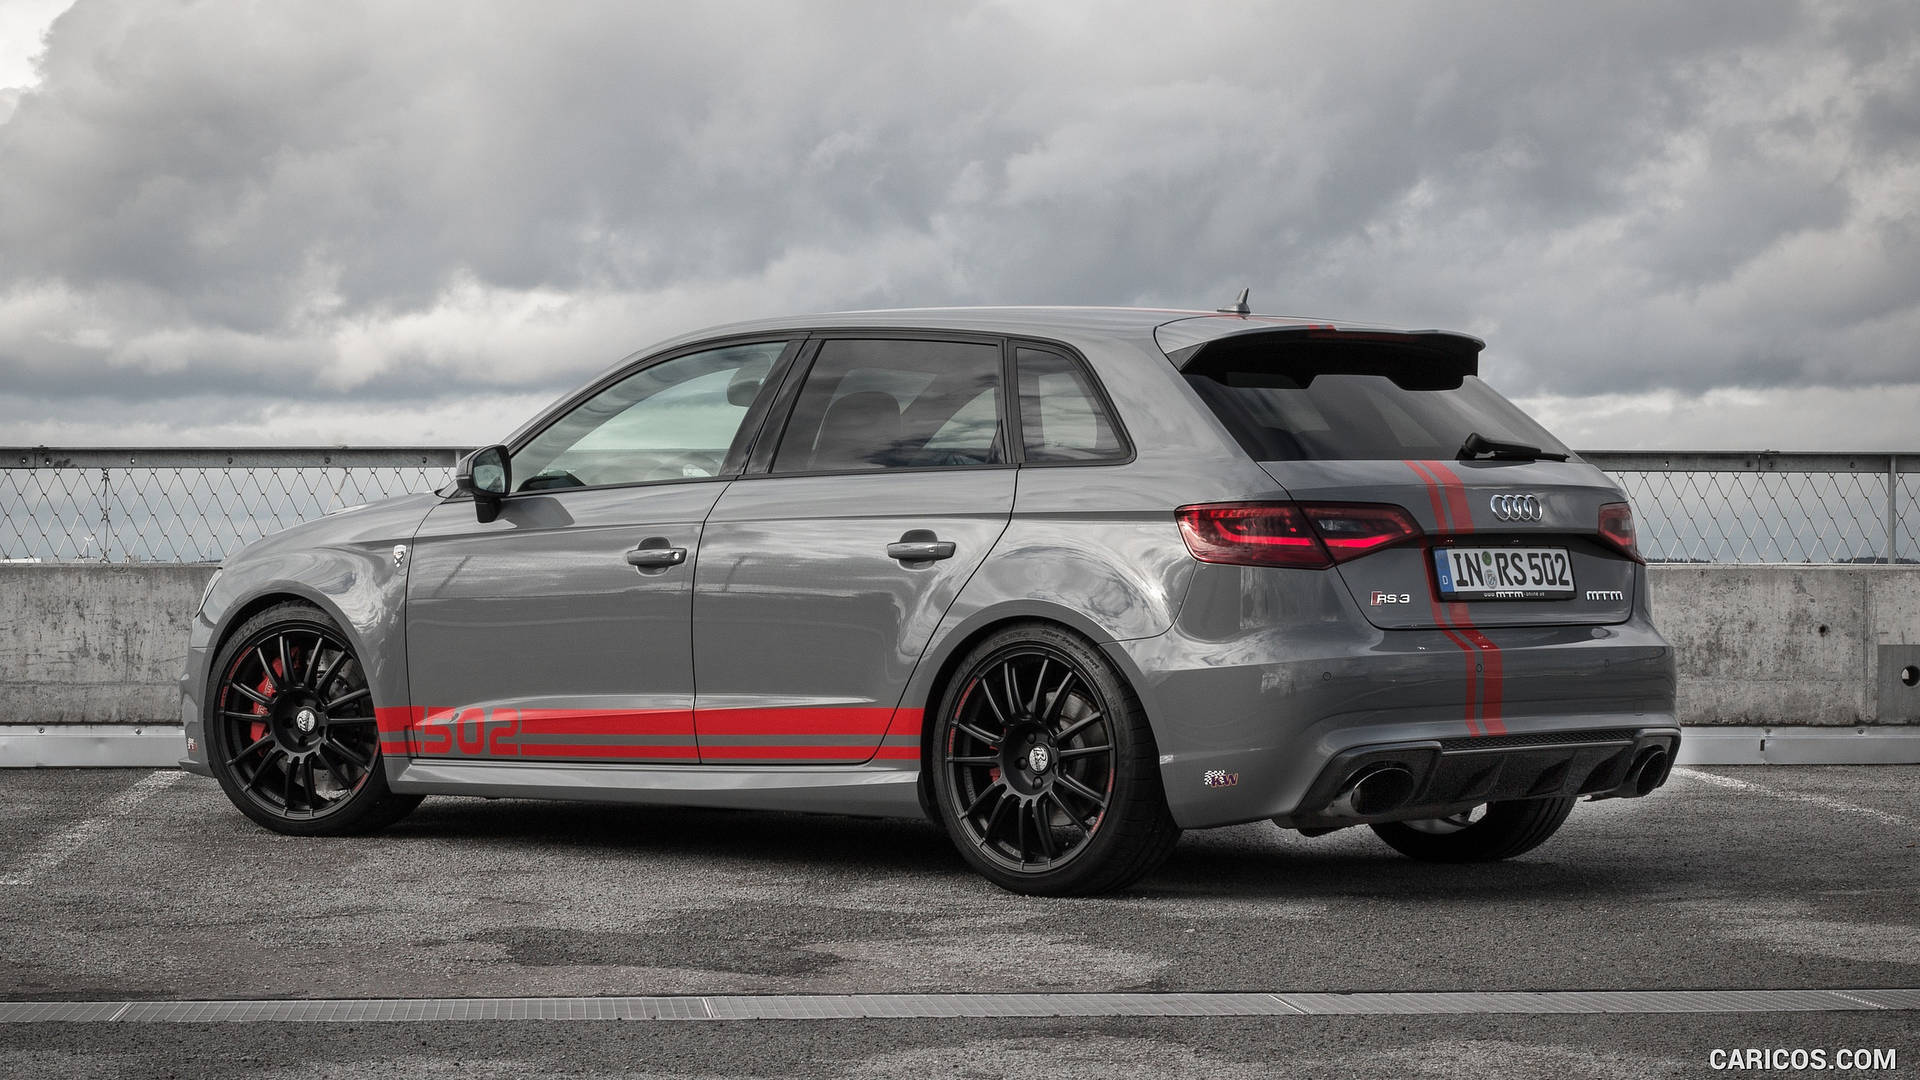 Powerful Sophistication - Grey Audi RS with Red Accents Wallpaper